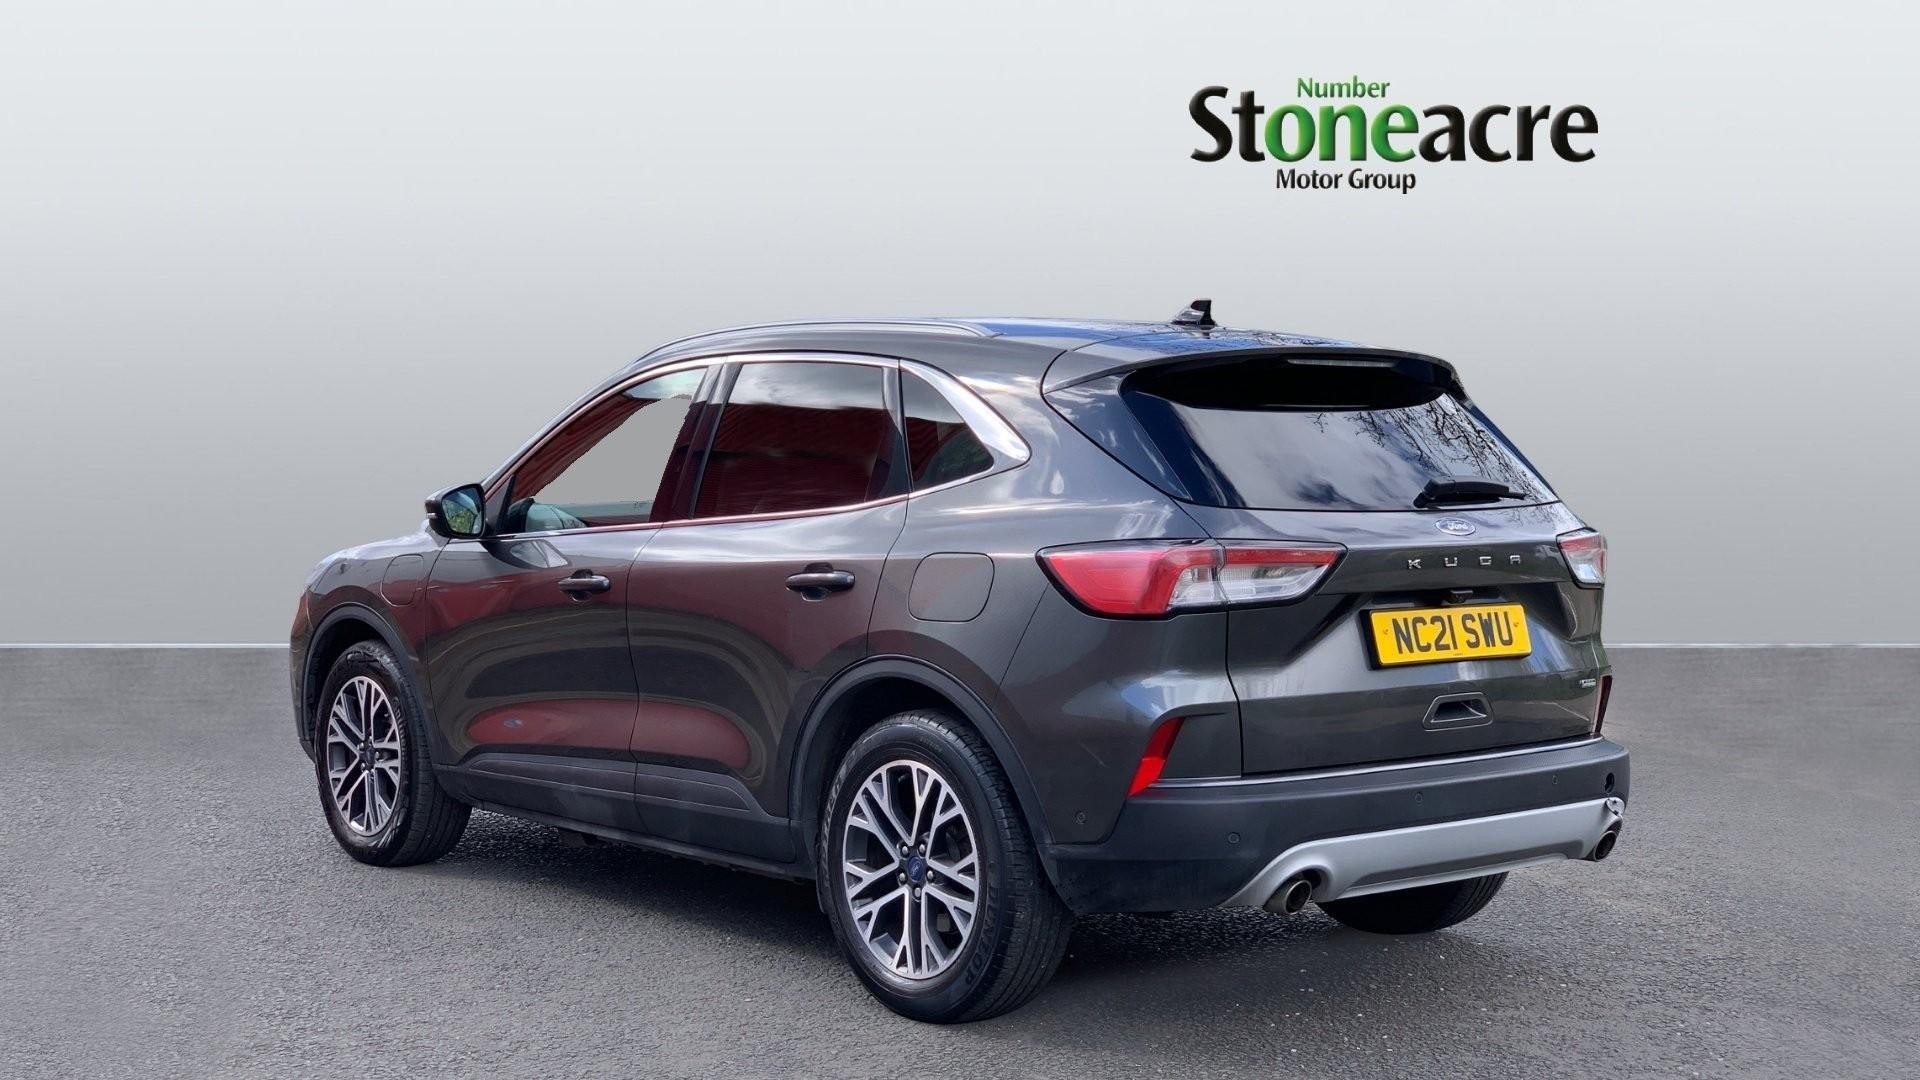 Ford Kuga 2.5 EcoBoost Duratec 14.4kWh Titanium First Edition SUV 5dr Petrol Plug-in Hybrid CVT Euro 6 (s/s) (225 ps) (NC21SWU) image 1